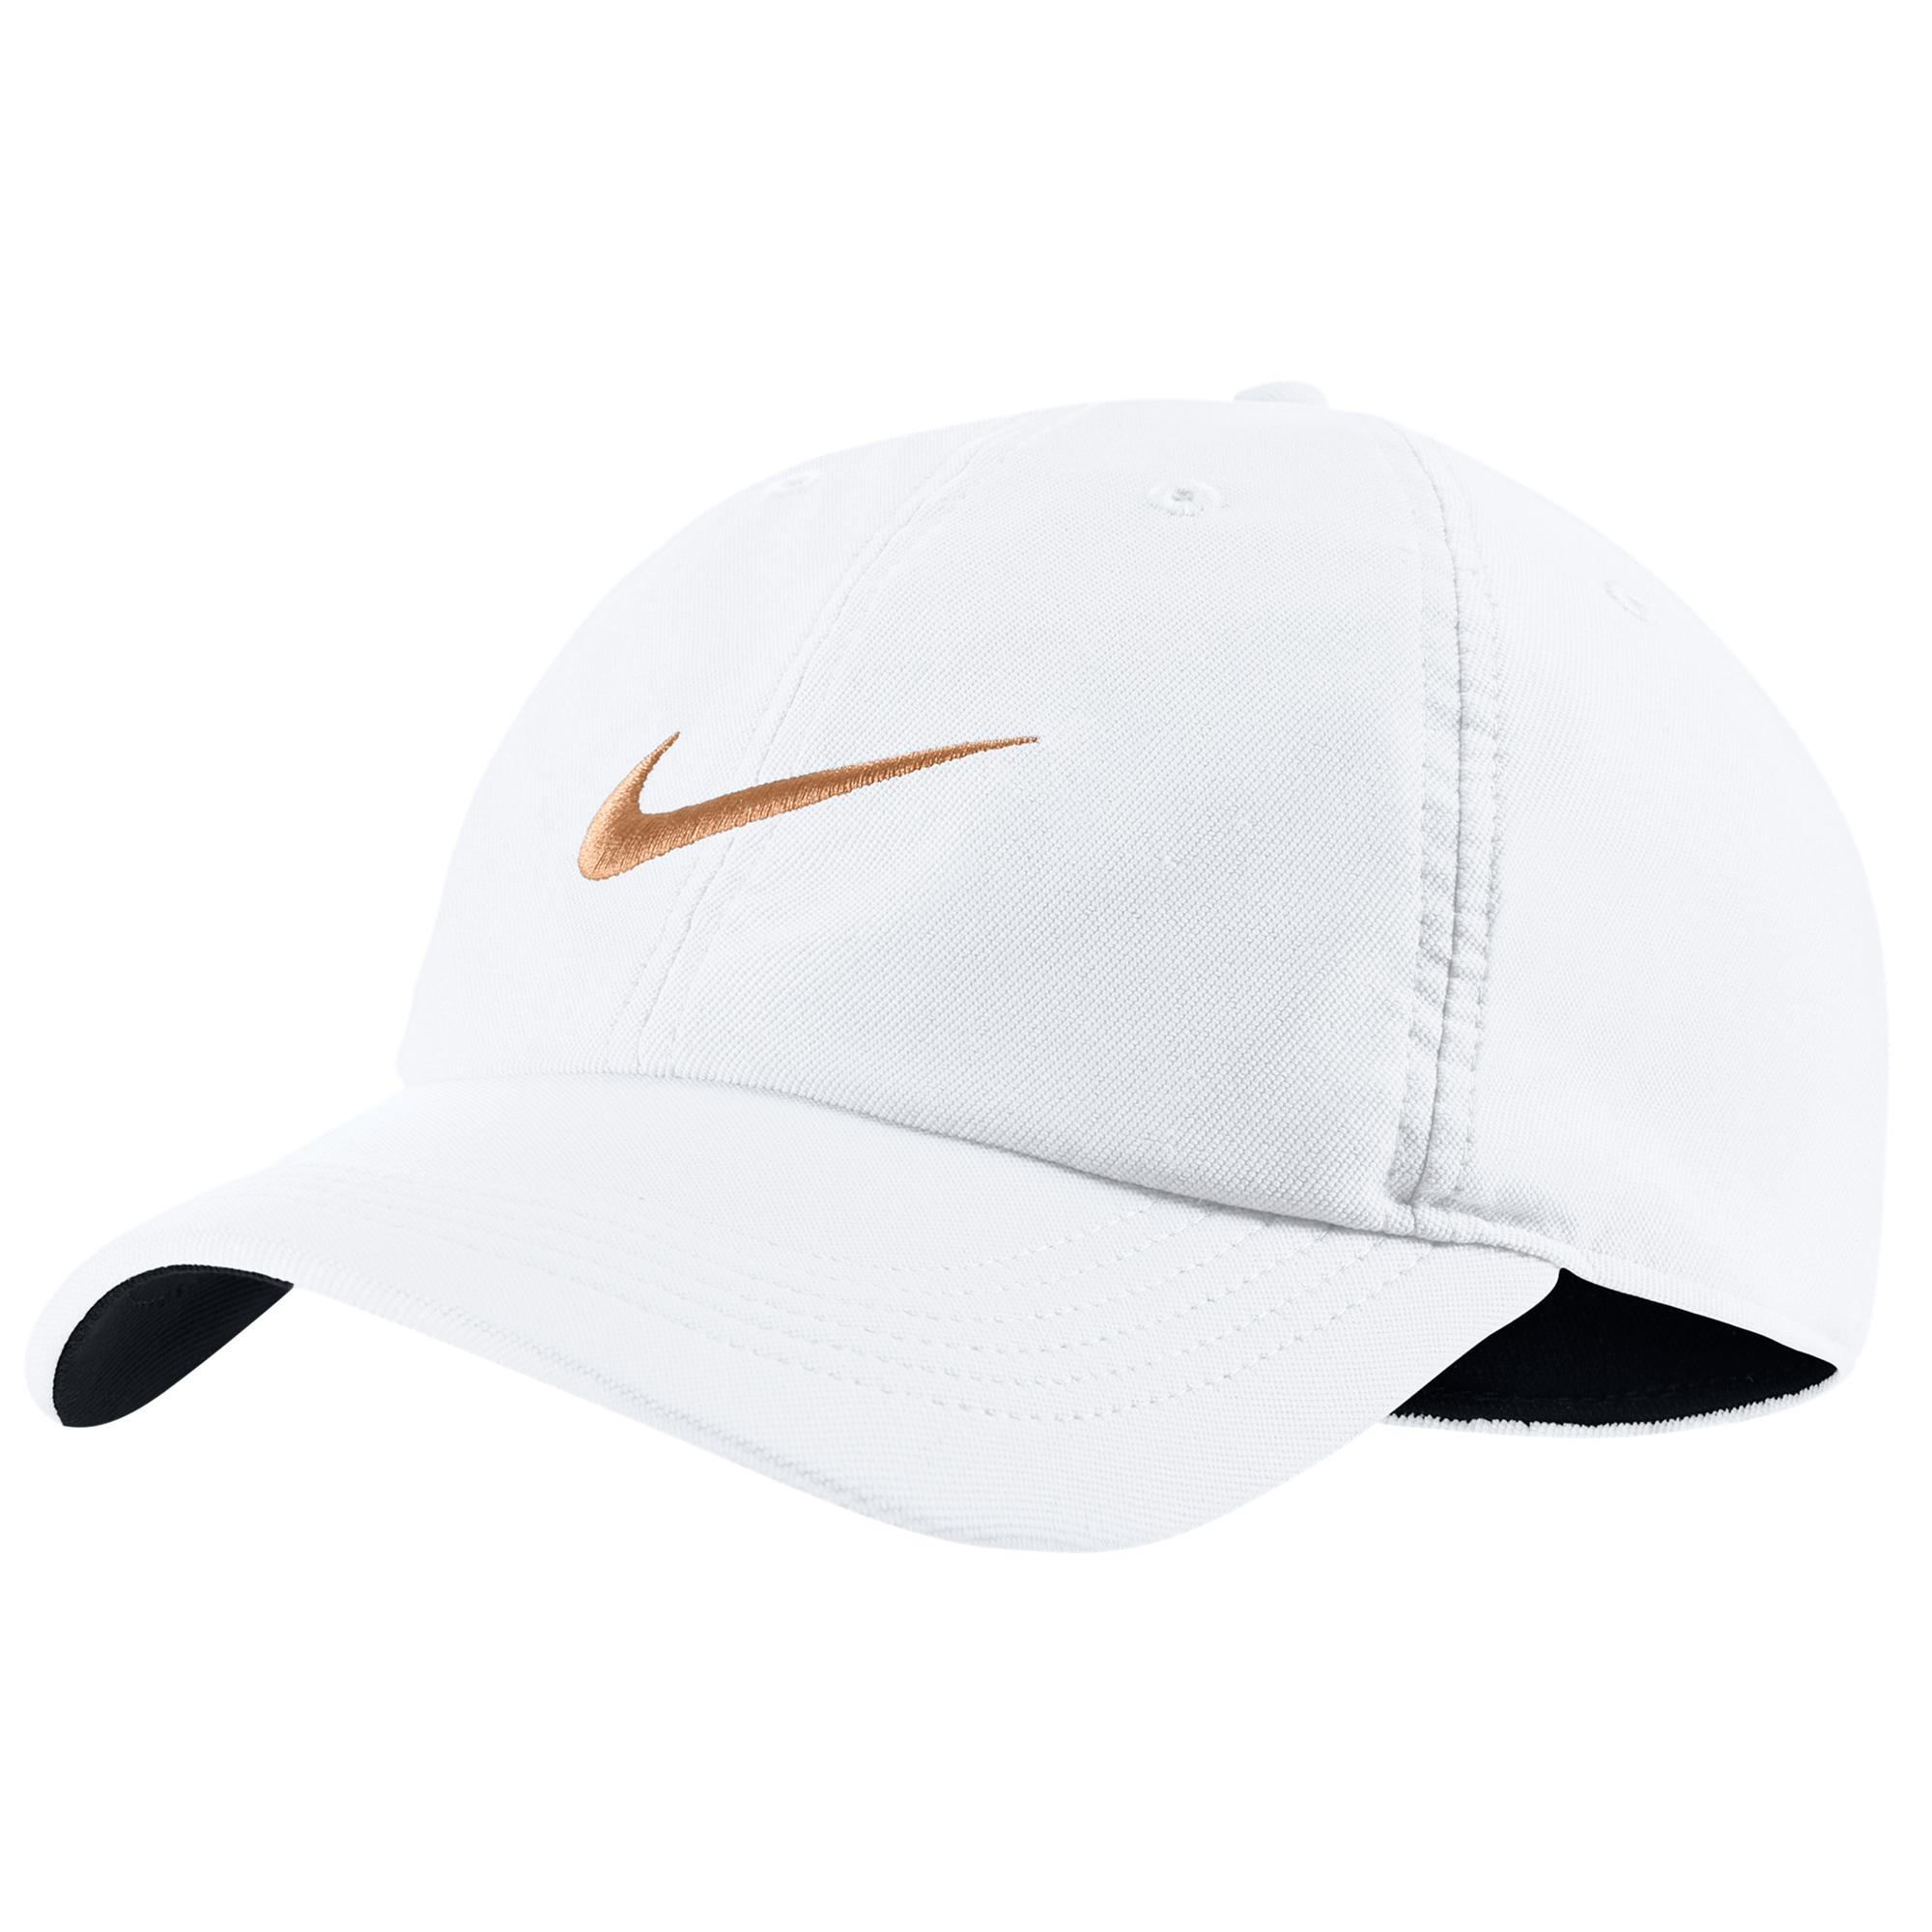 white and gold nike hat